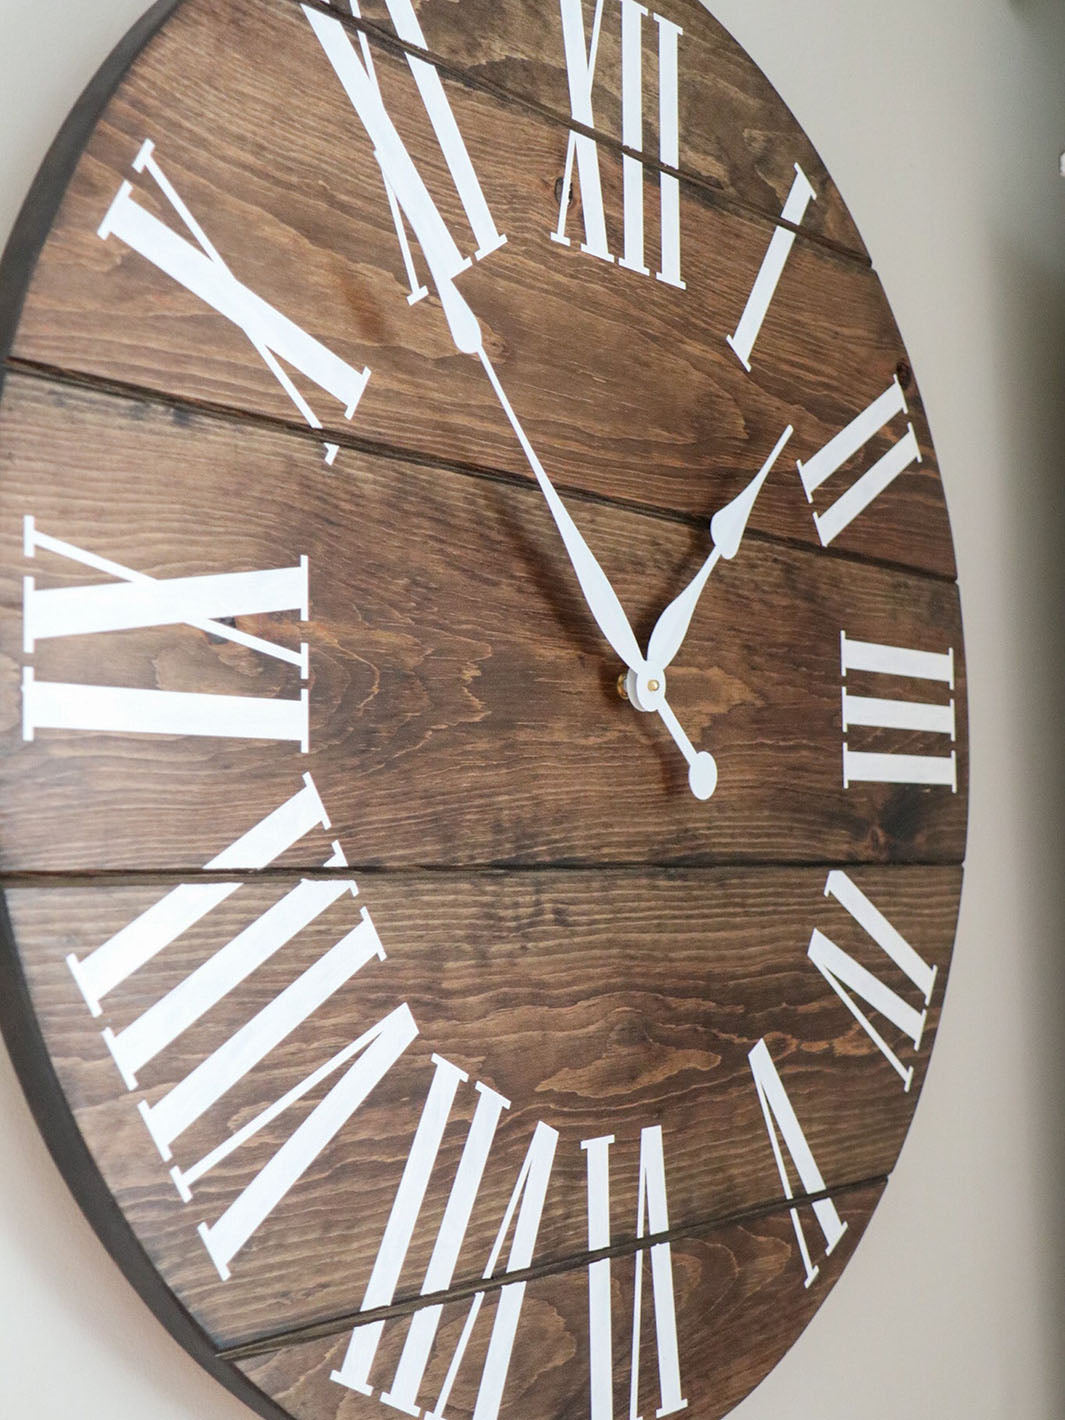 Dark Stained Solid Pine Wood Wall Clock